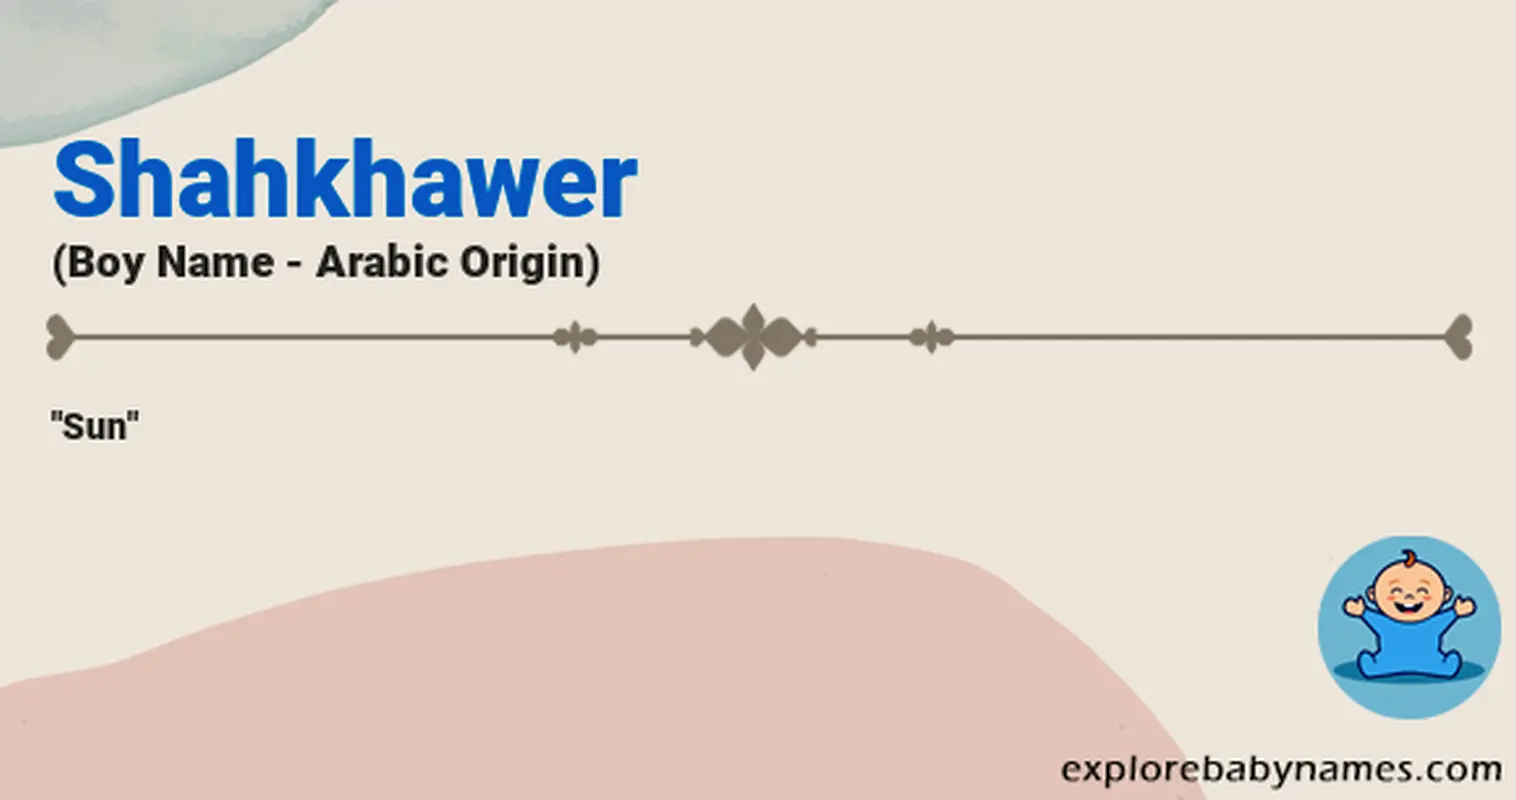 Meaning of Shahkhawer